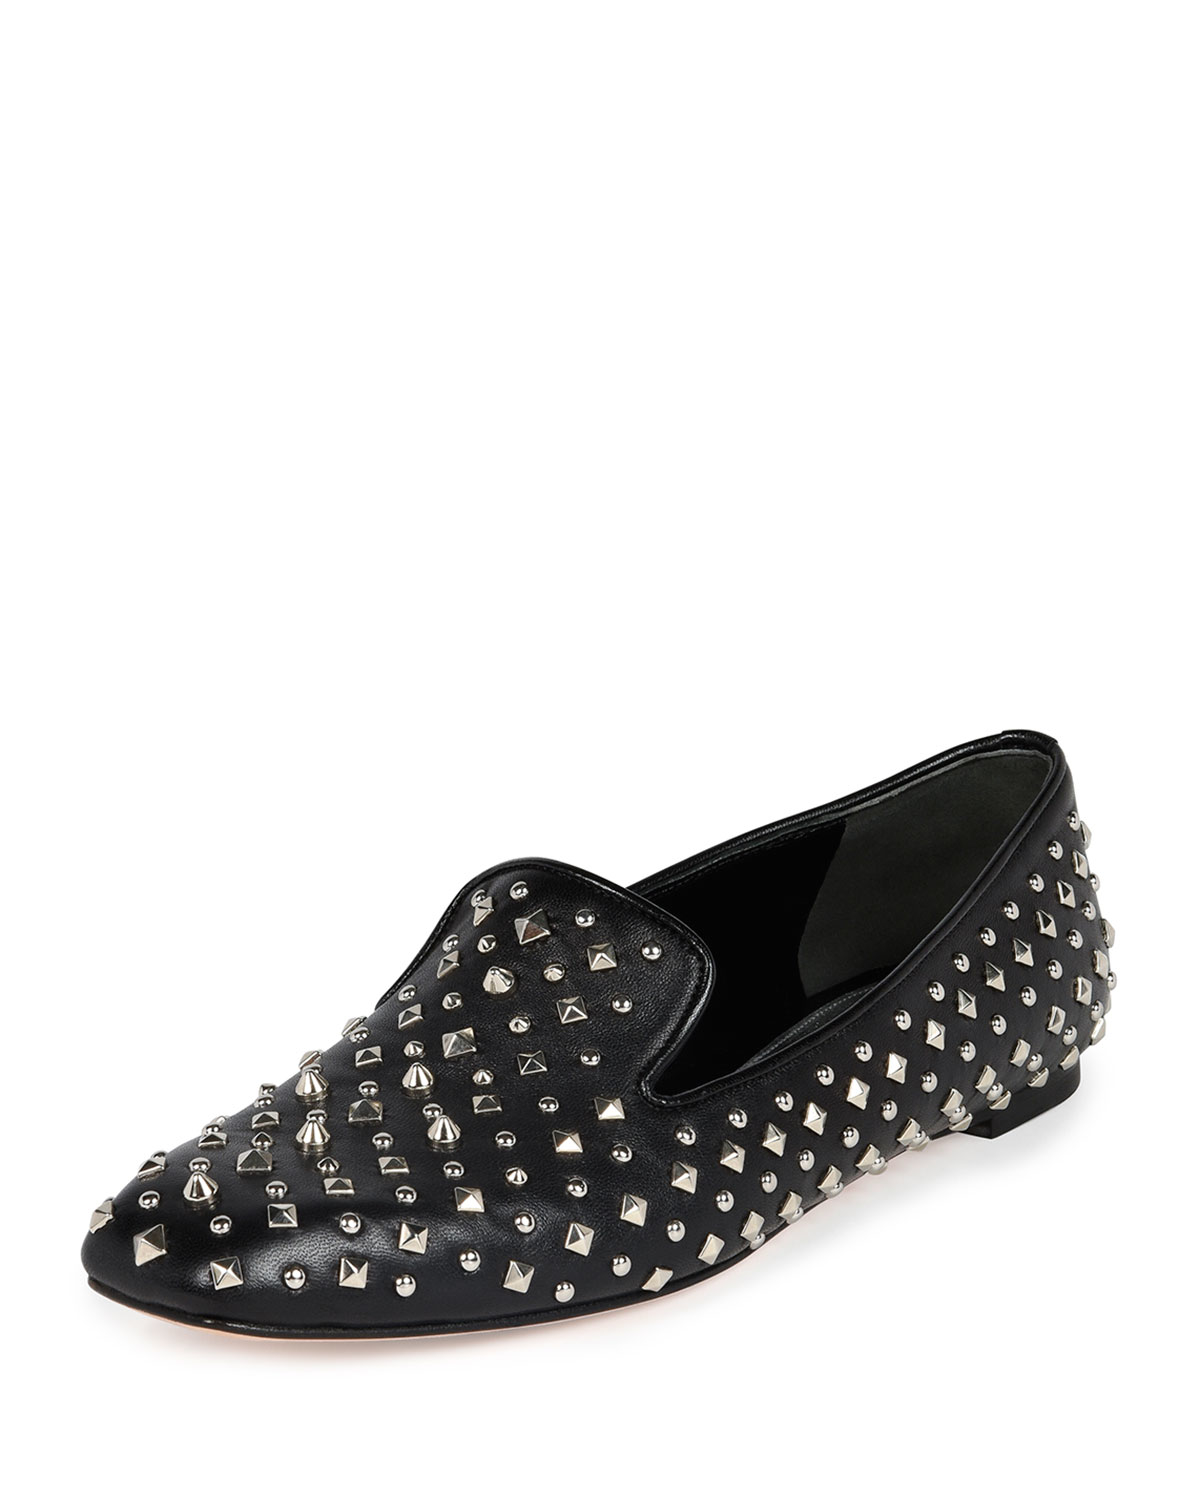 Lyst - Alexander McQueen Studded Leather Loafer in Black